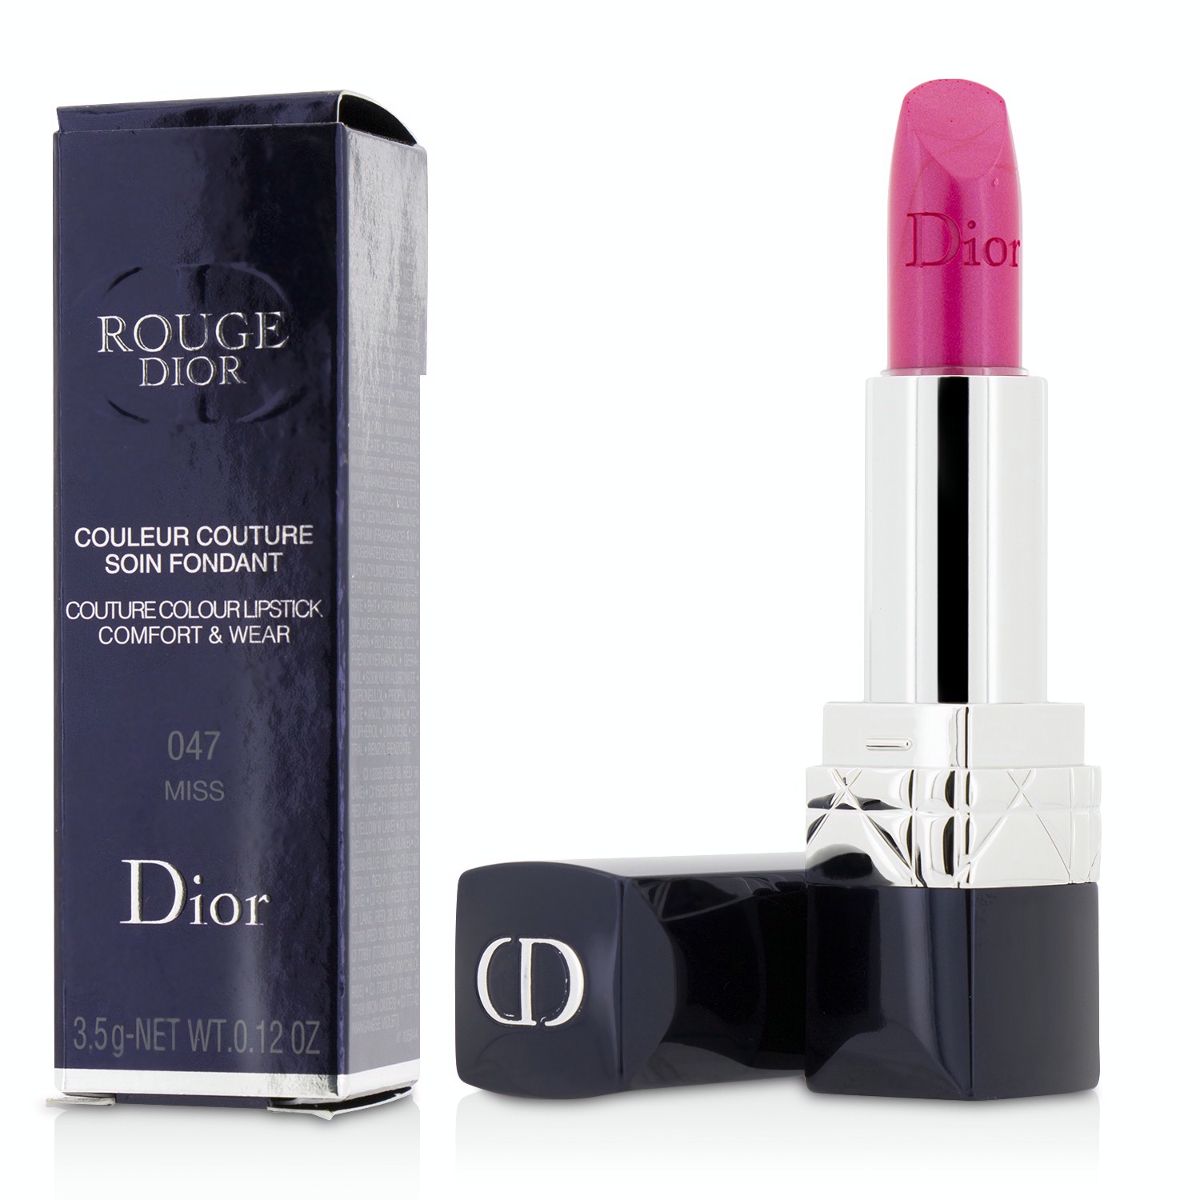 Rouge Dior Couture Colour Comfort  Wear Lipstick - # 047 Miss Christian Dior Image